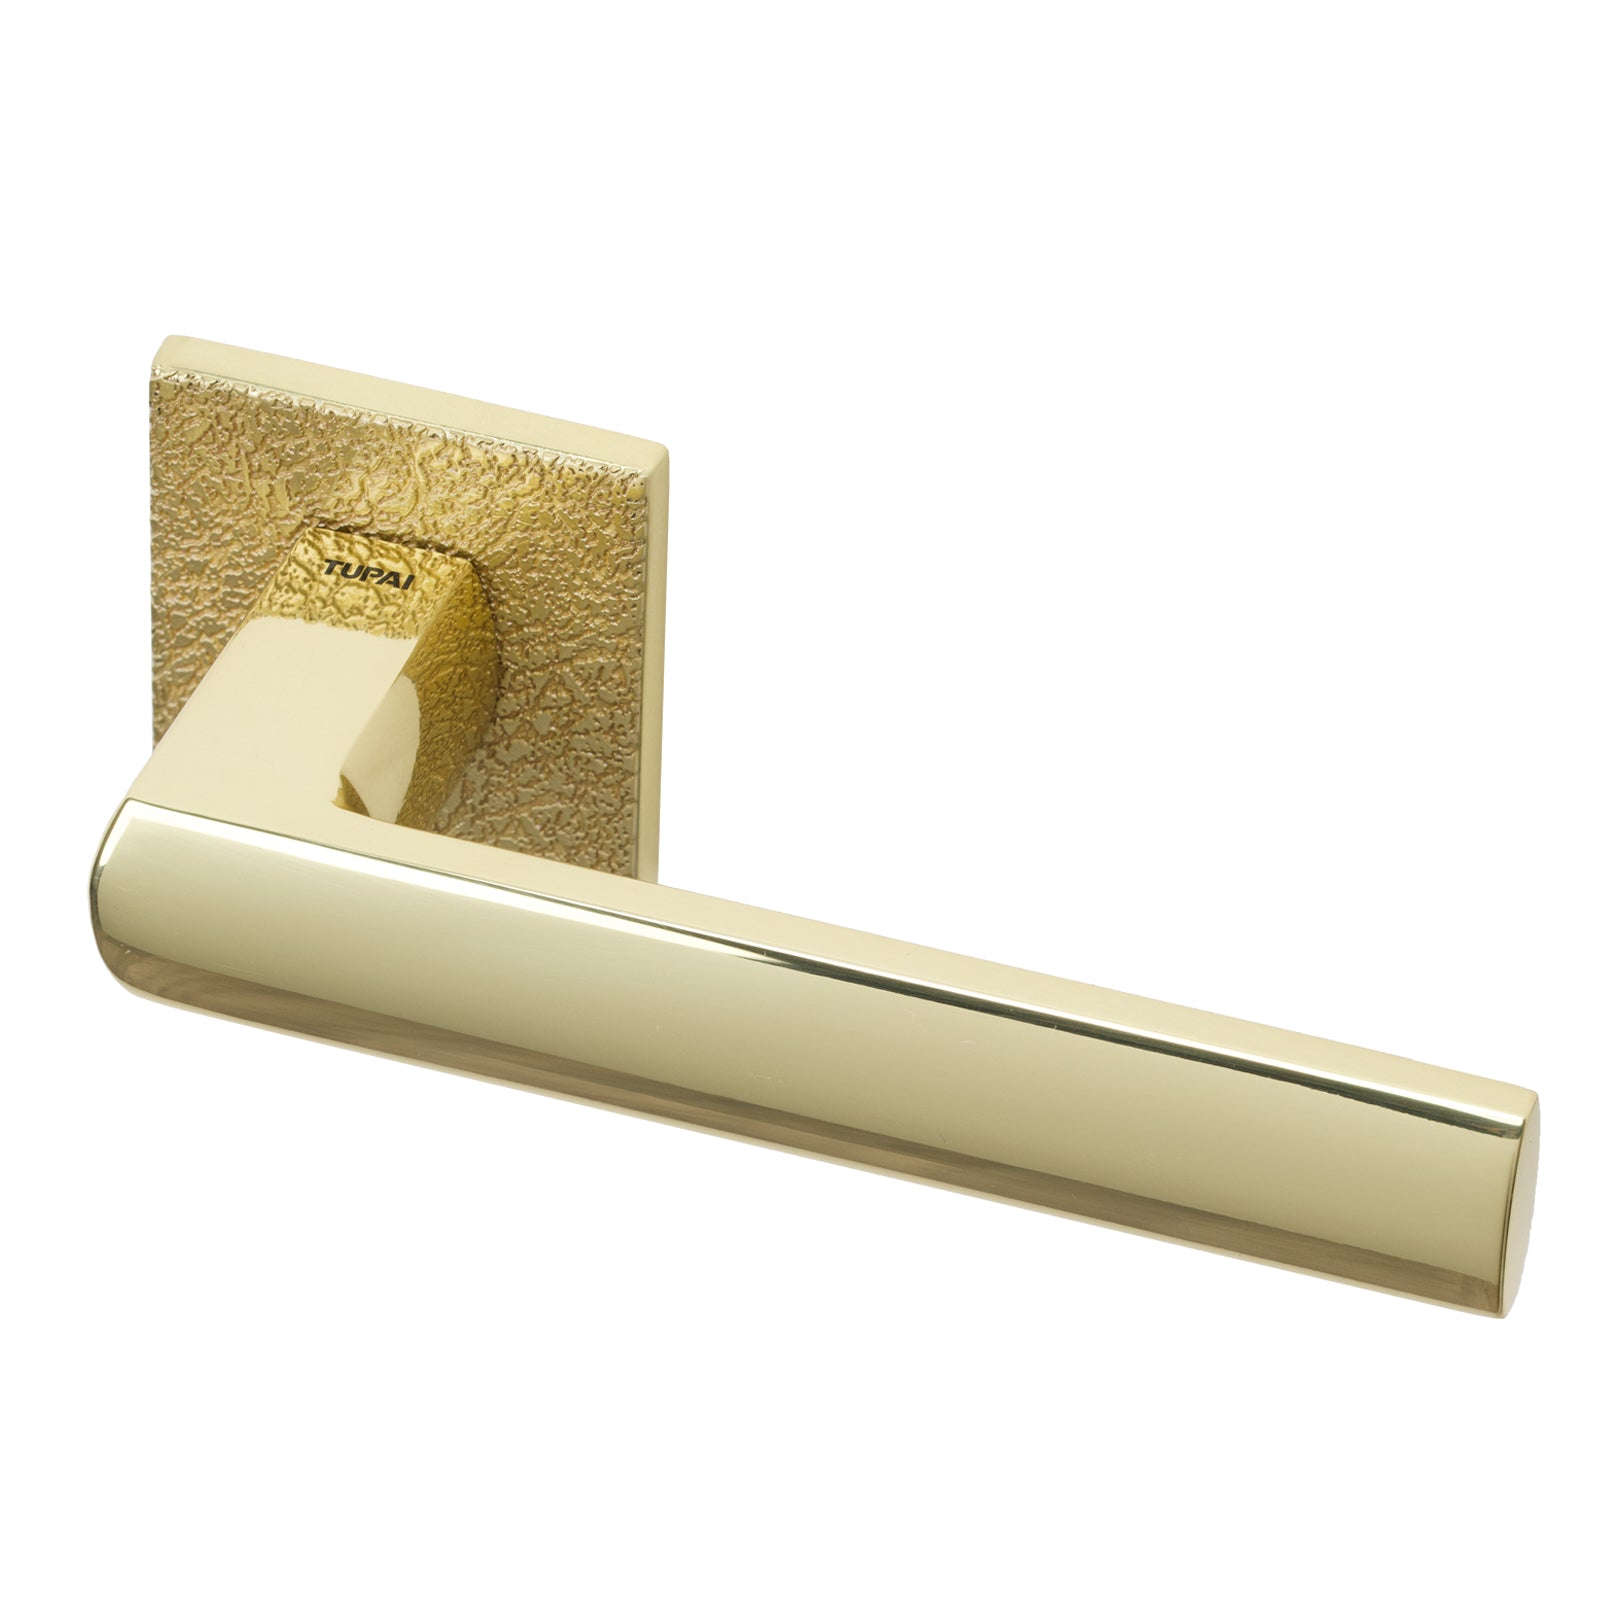 Coroto Leather Texture Lever on Rose Door Handle in Polished BrassFinish SHOW